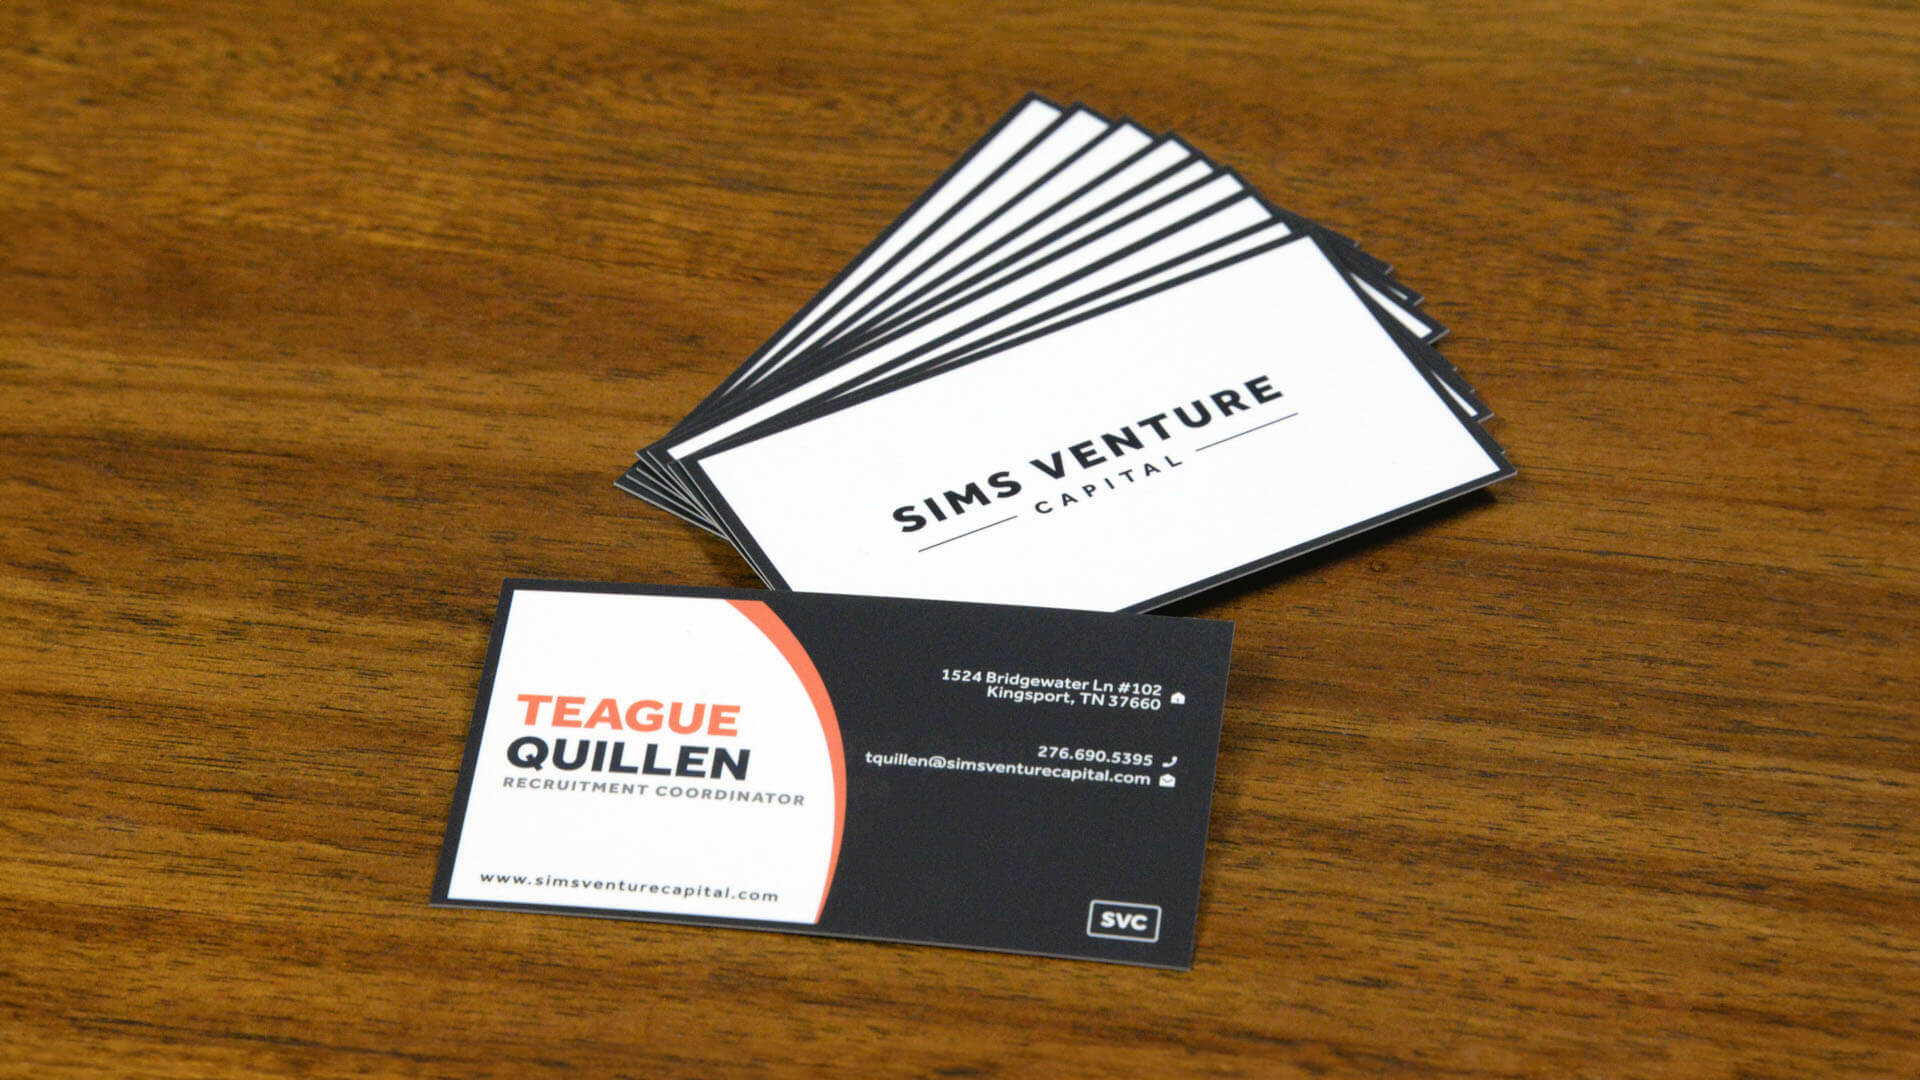 SVC Business Cards